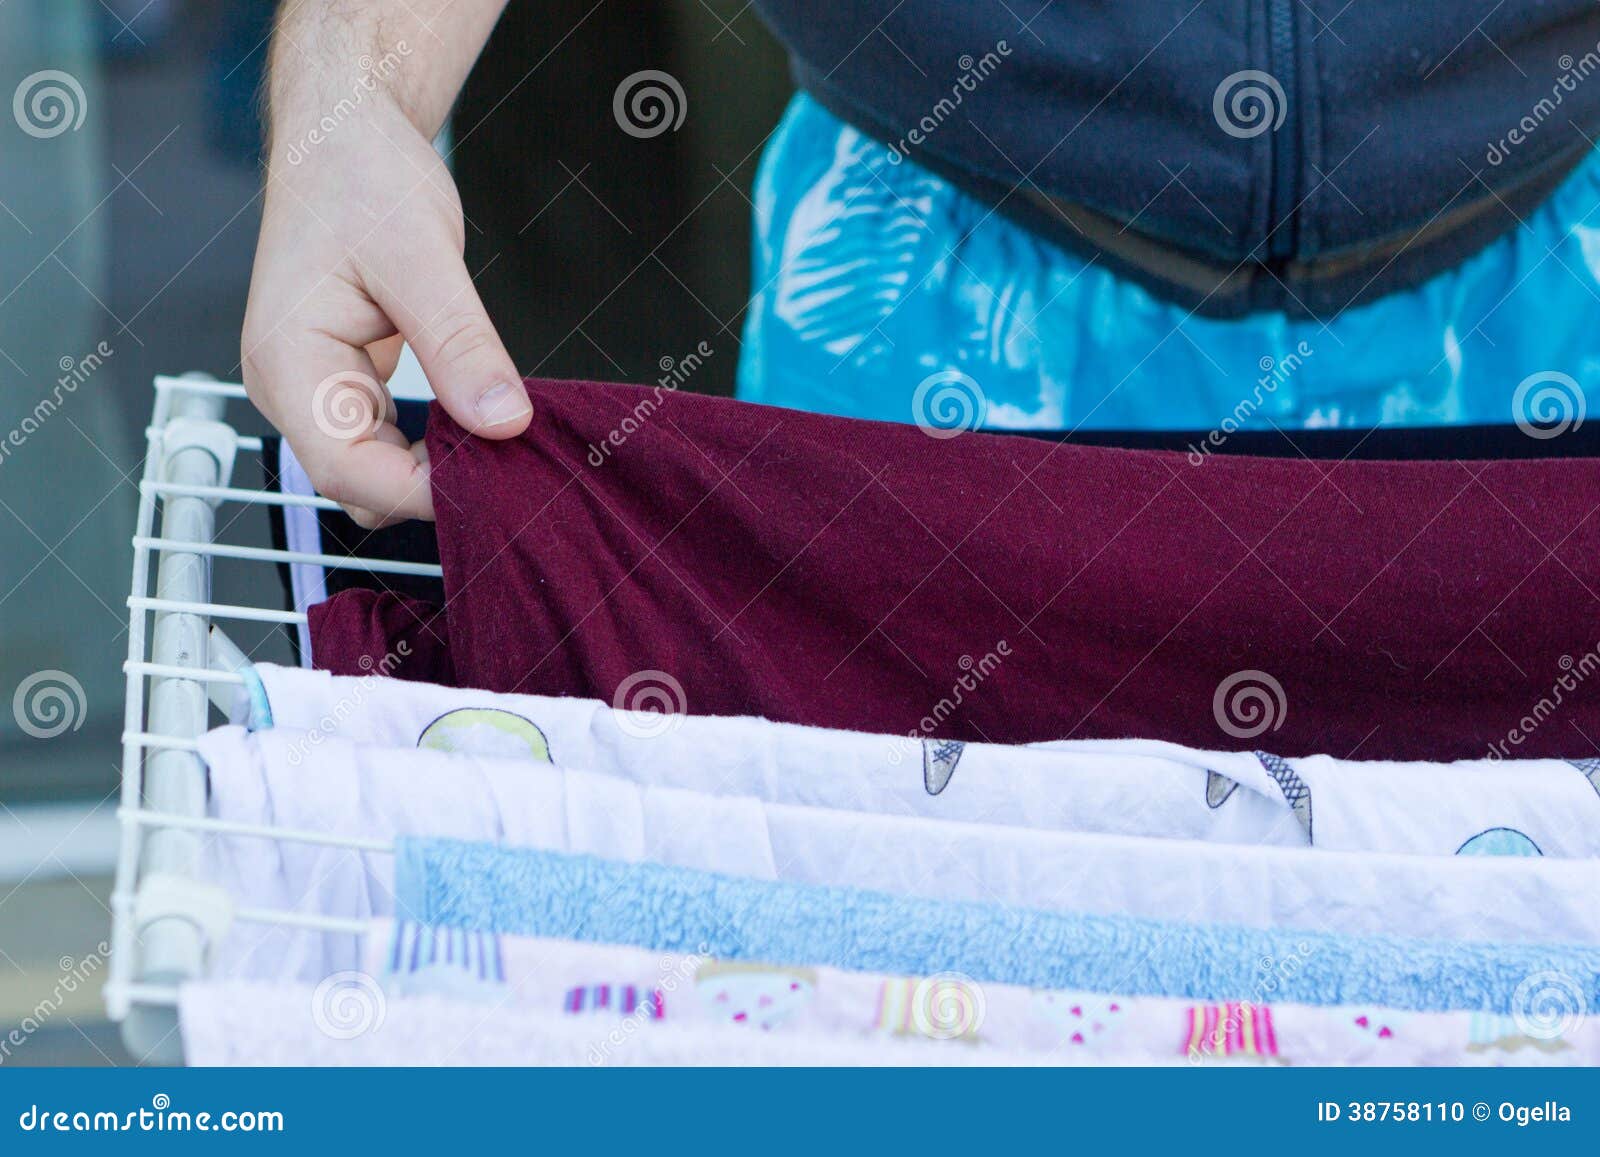 https://thumbs.dreamstime.com/z/young-man-drying-clothes-laundry-hands-hanging-wet-line-38758110.jpg